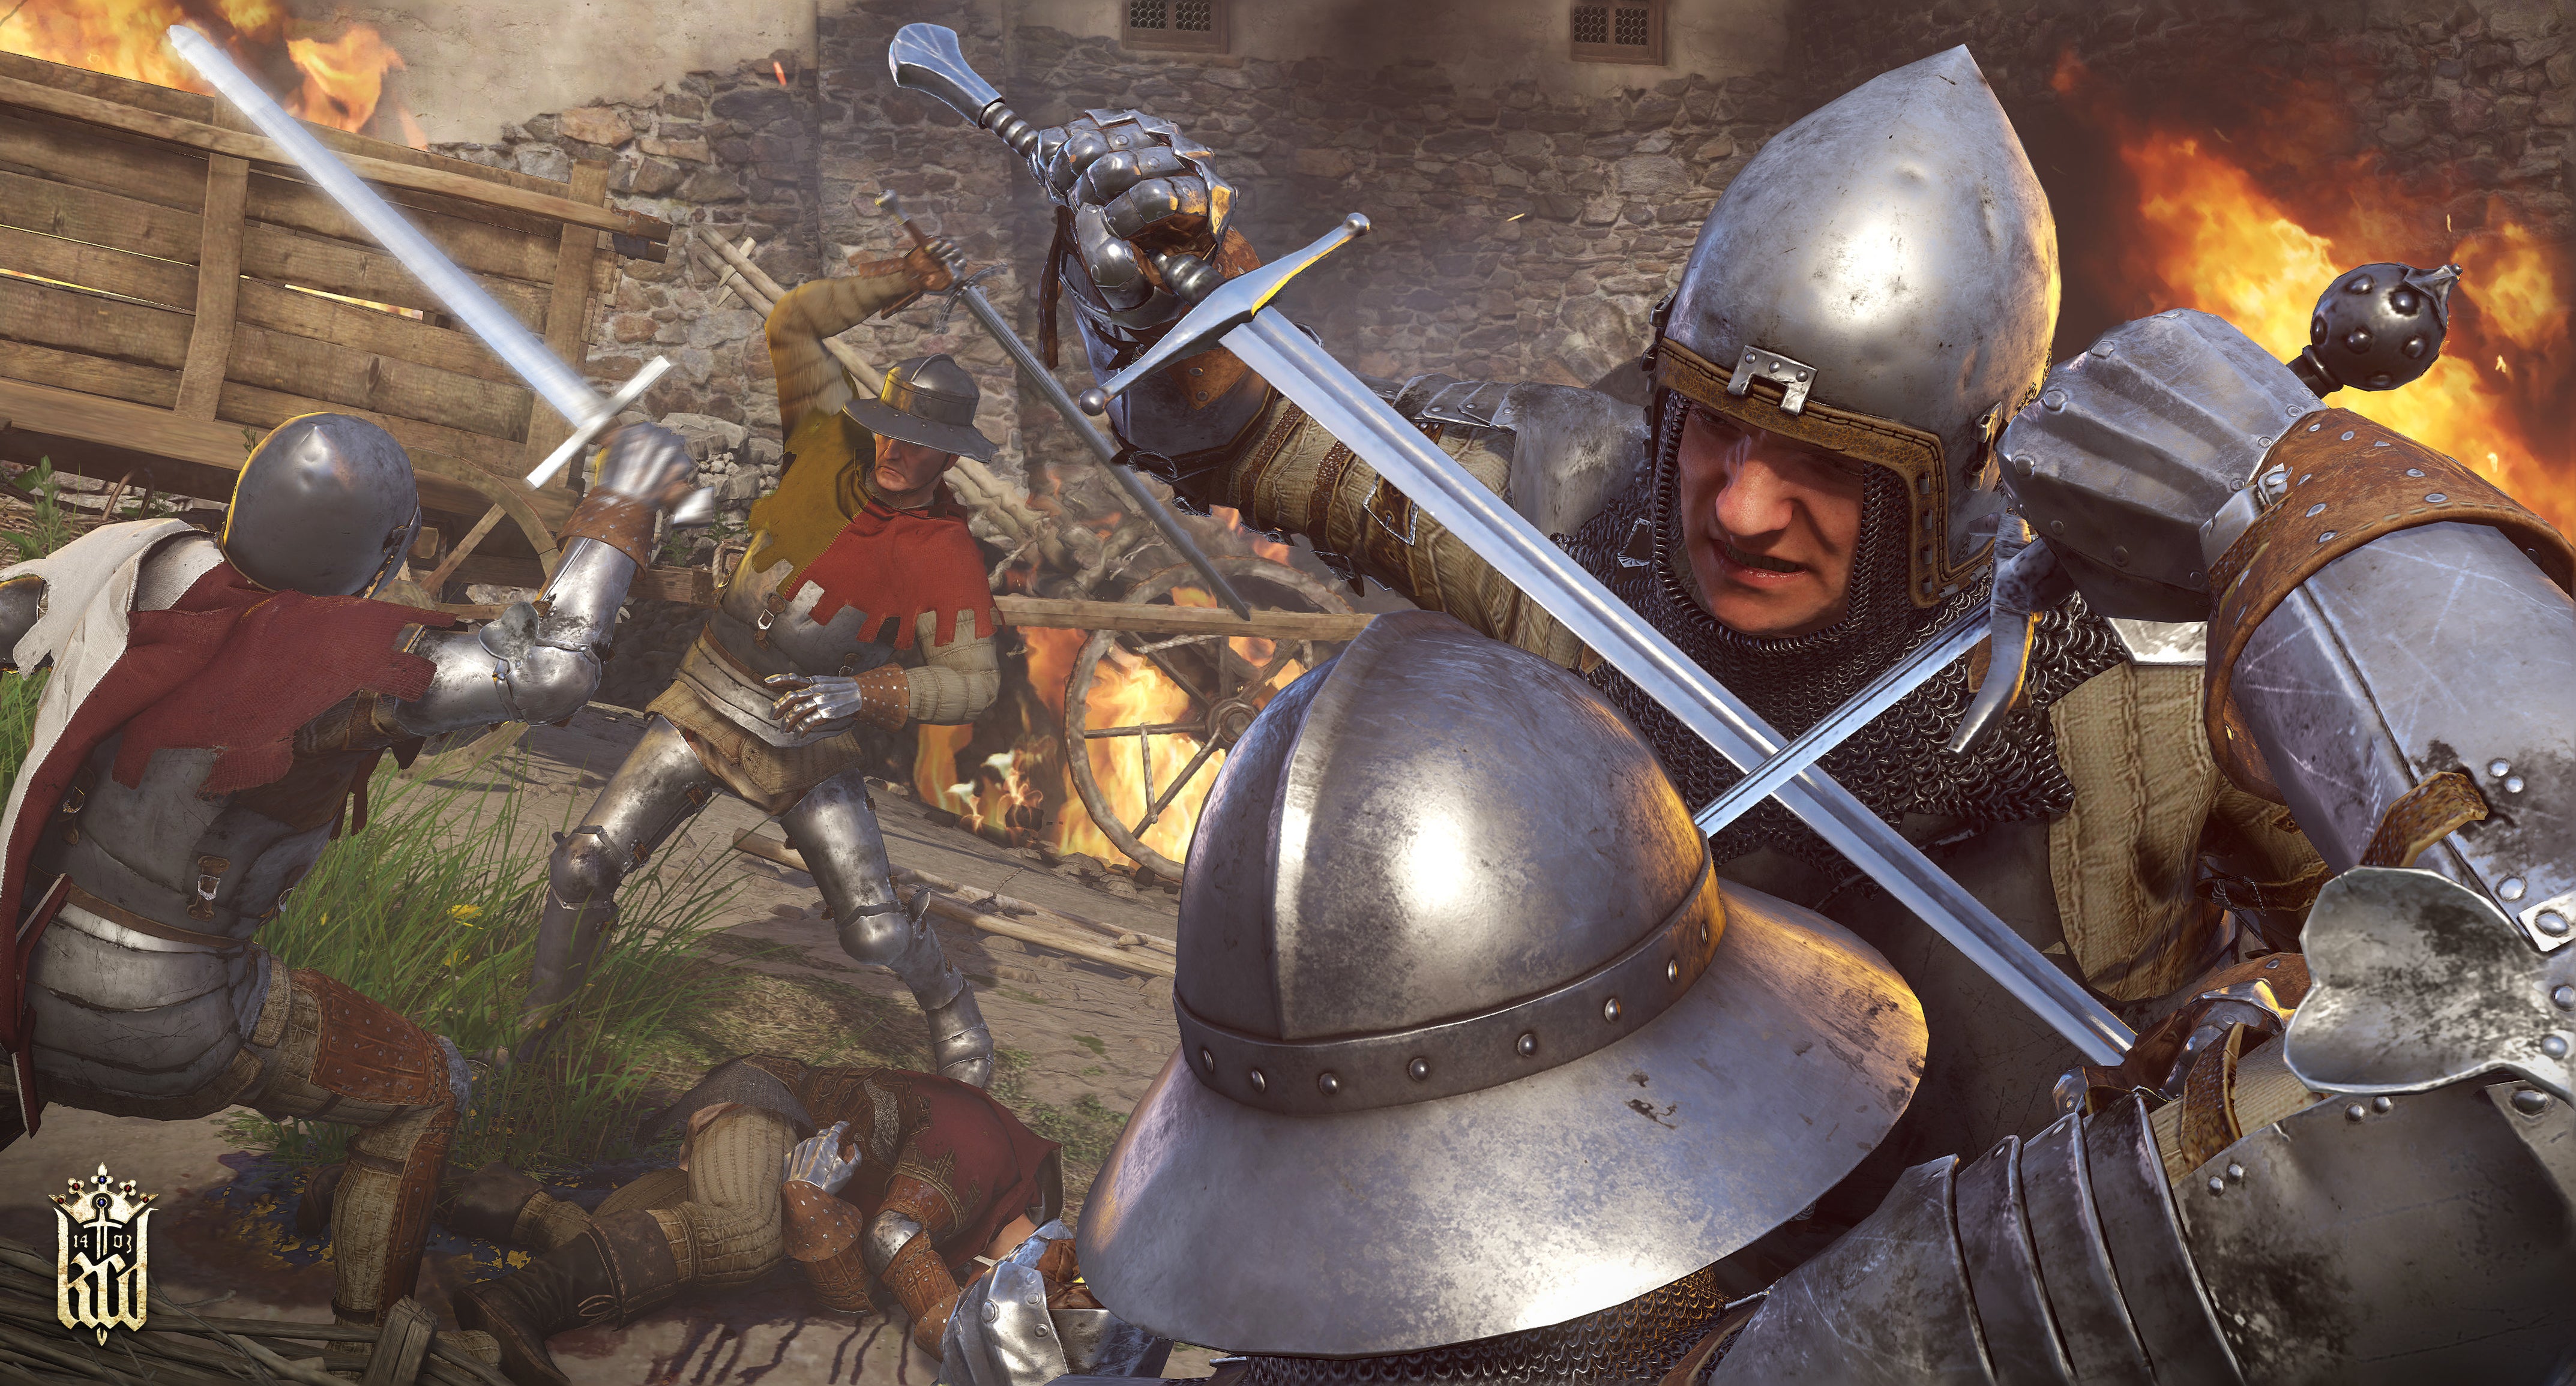 Image for Kingdom Come: Deliverance: developer Warhorse "cannot guarantee any specific date" for patch 1.3